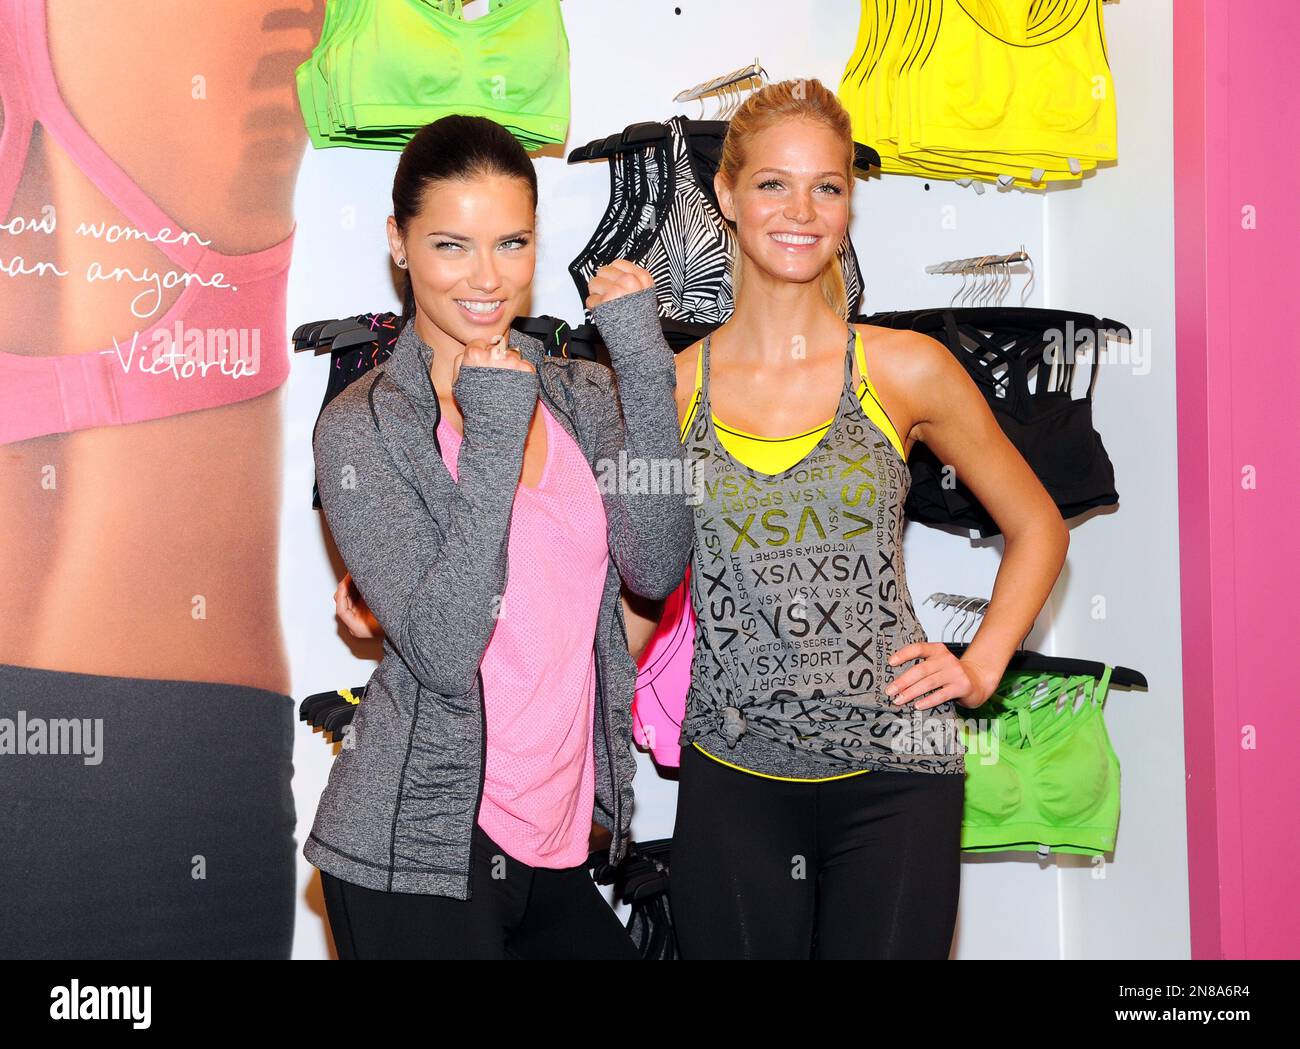 Models Adriana Lima, left, and Erin Heatherton pose together at a